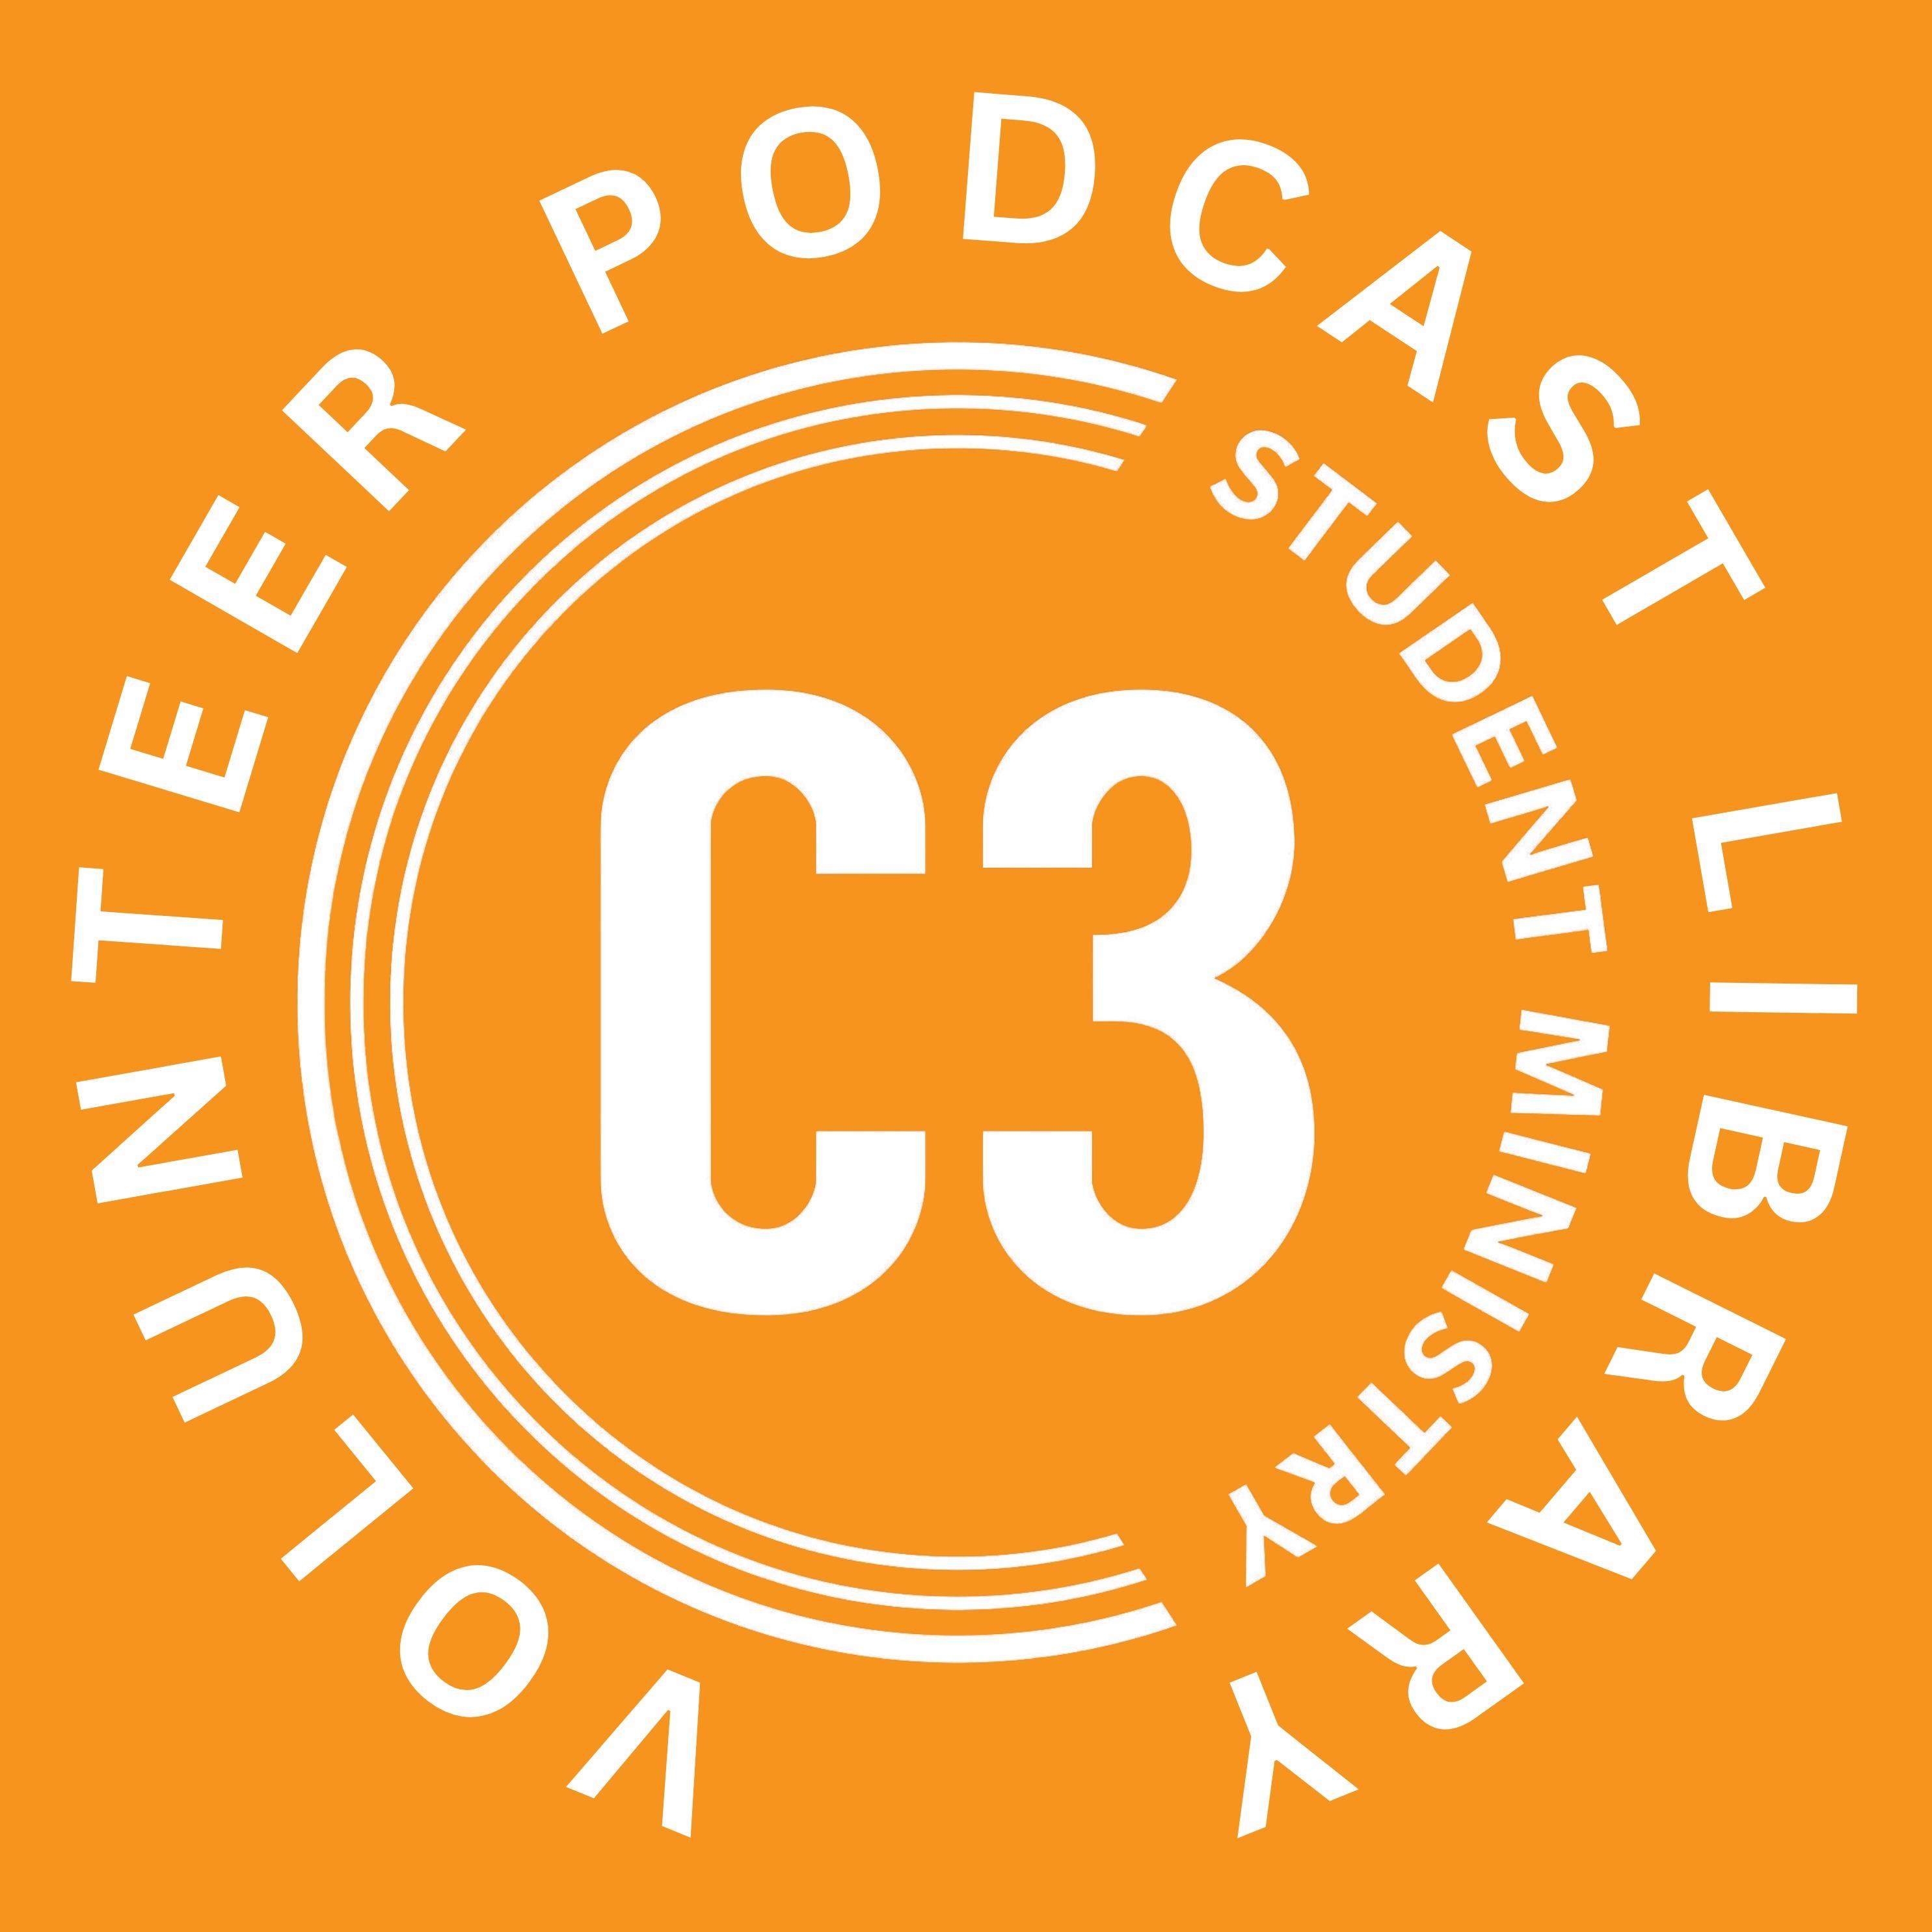 C3 Students Volunteer Podcast Library